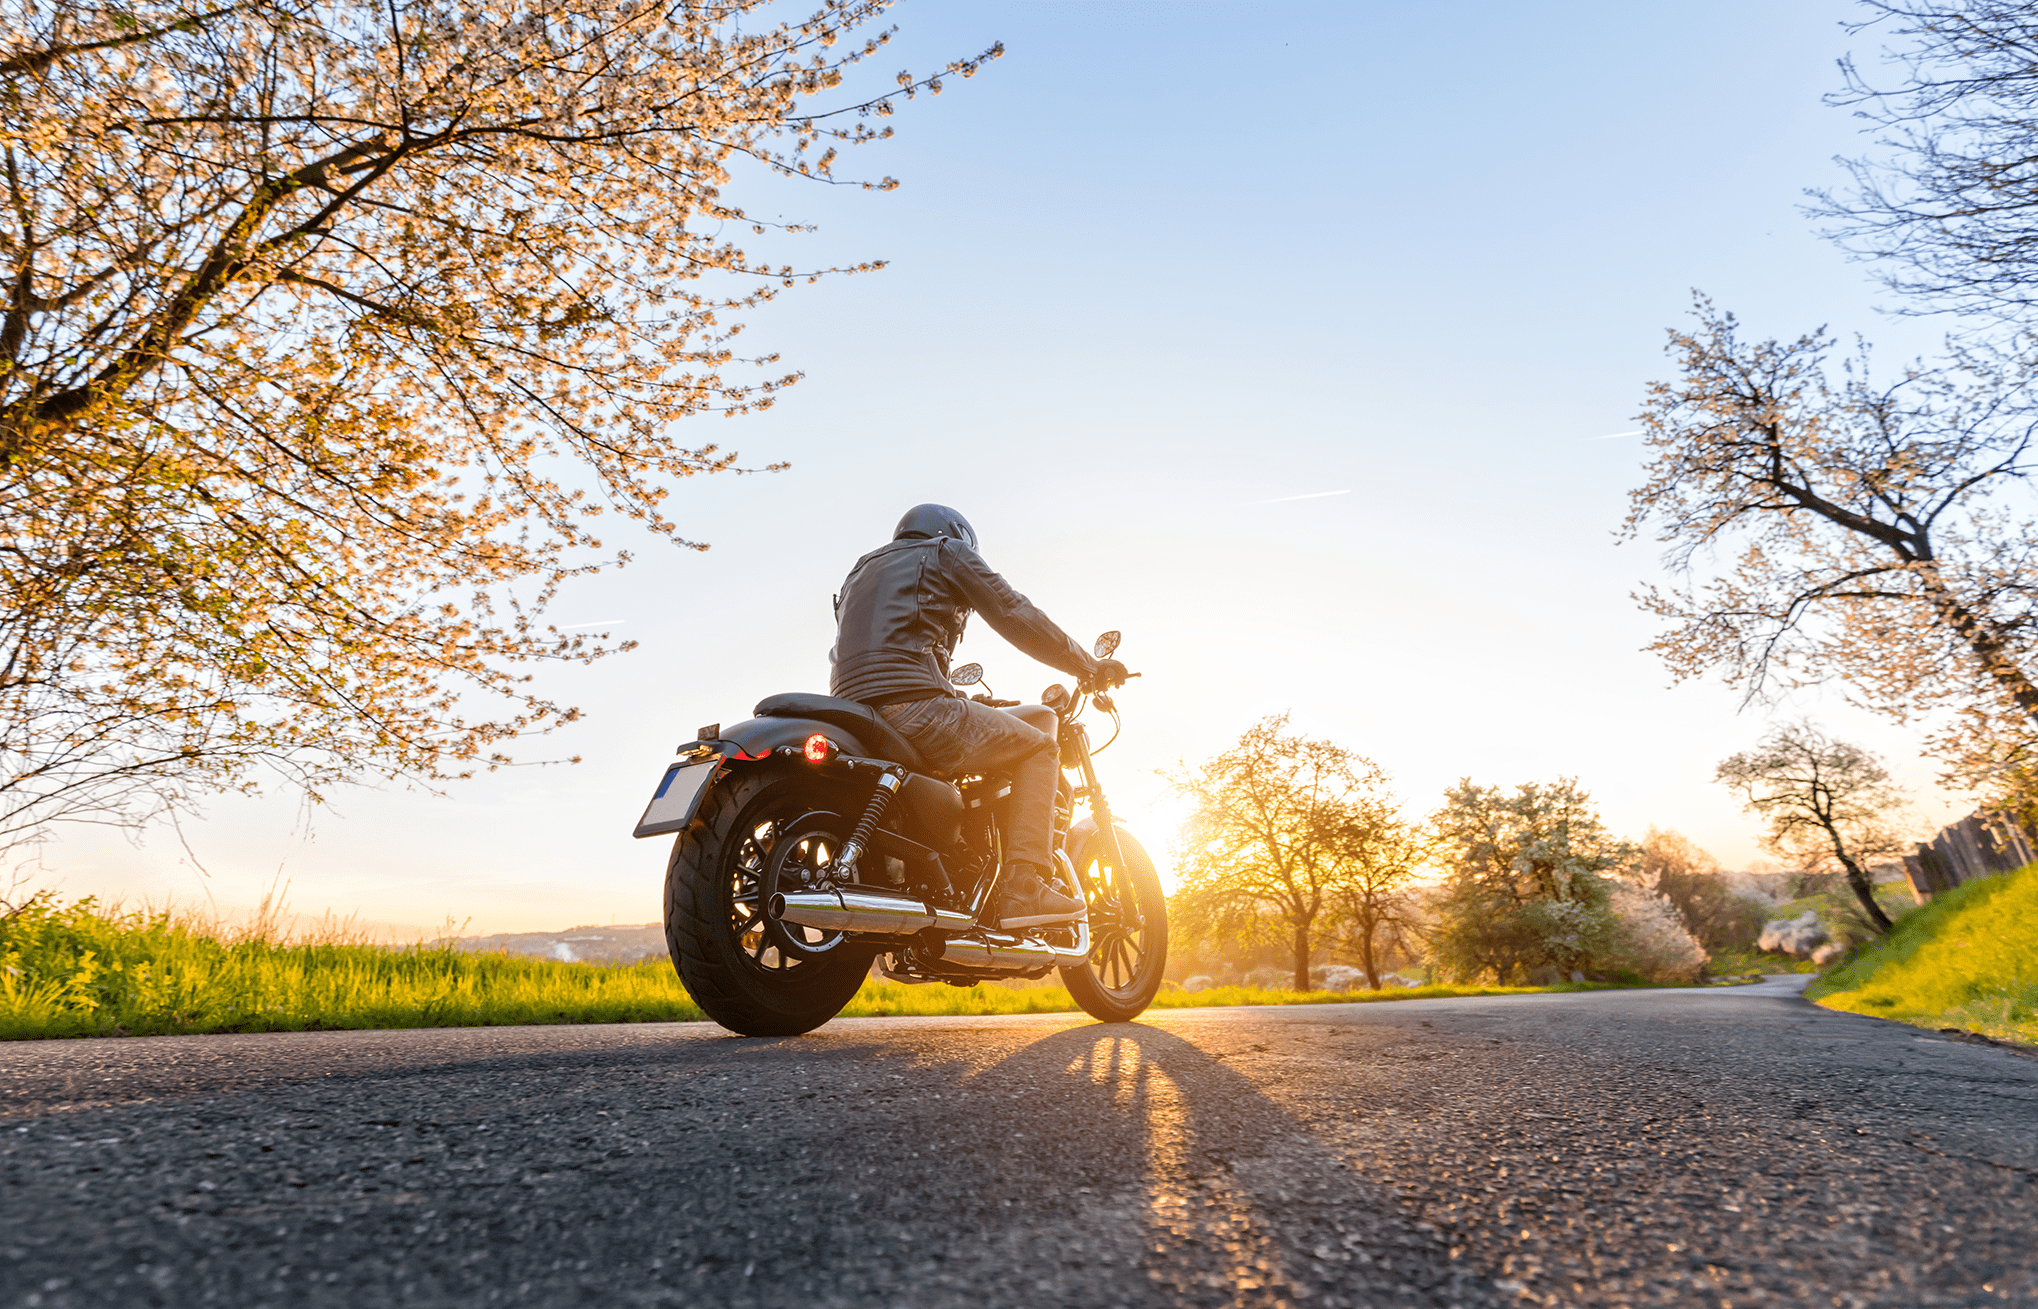 man on motorcycle riding on paved road